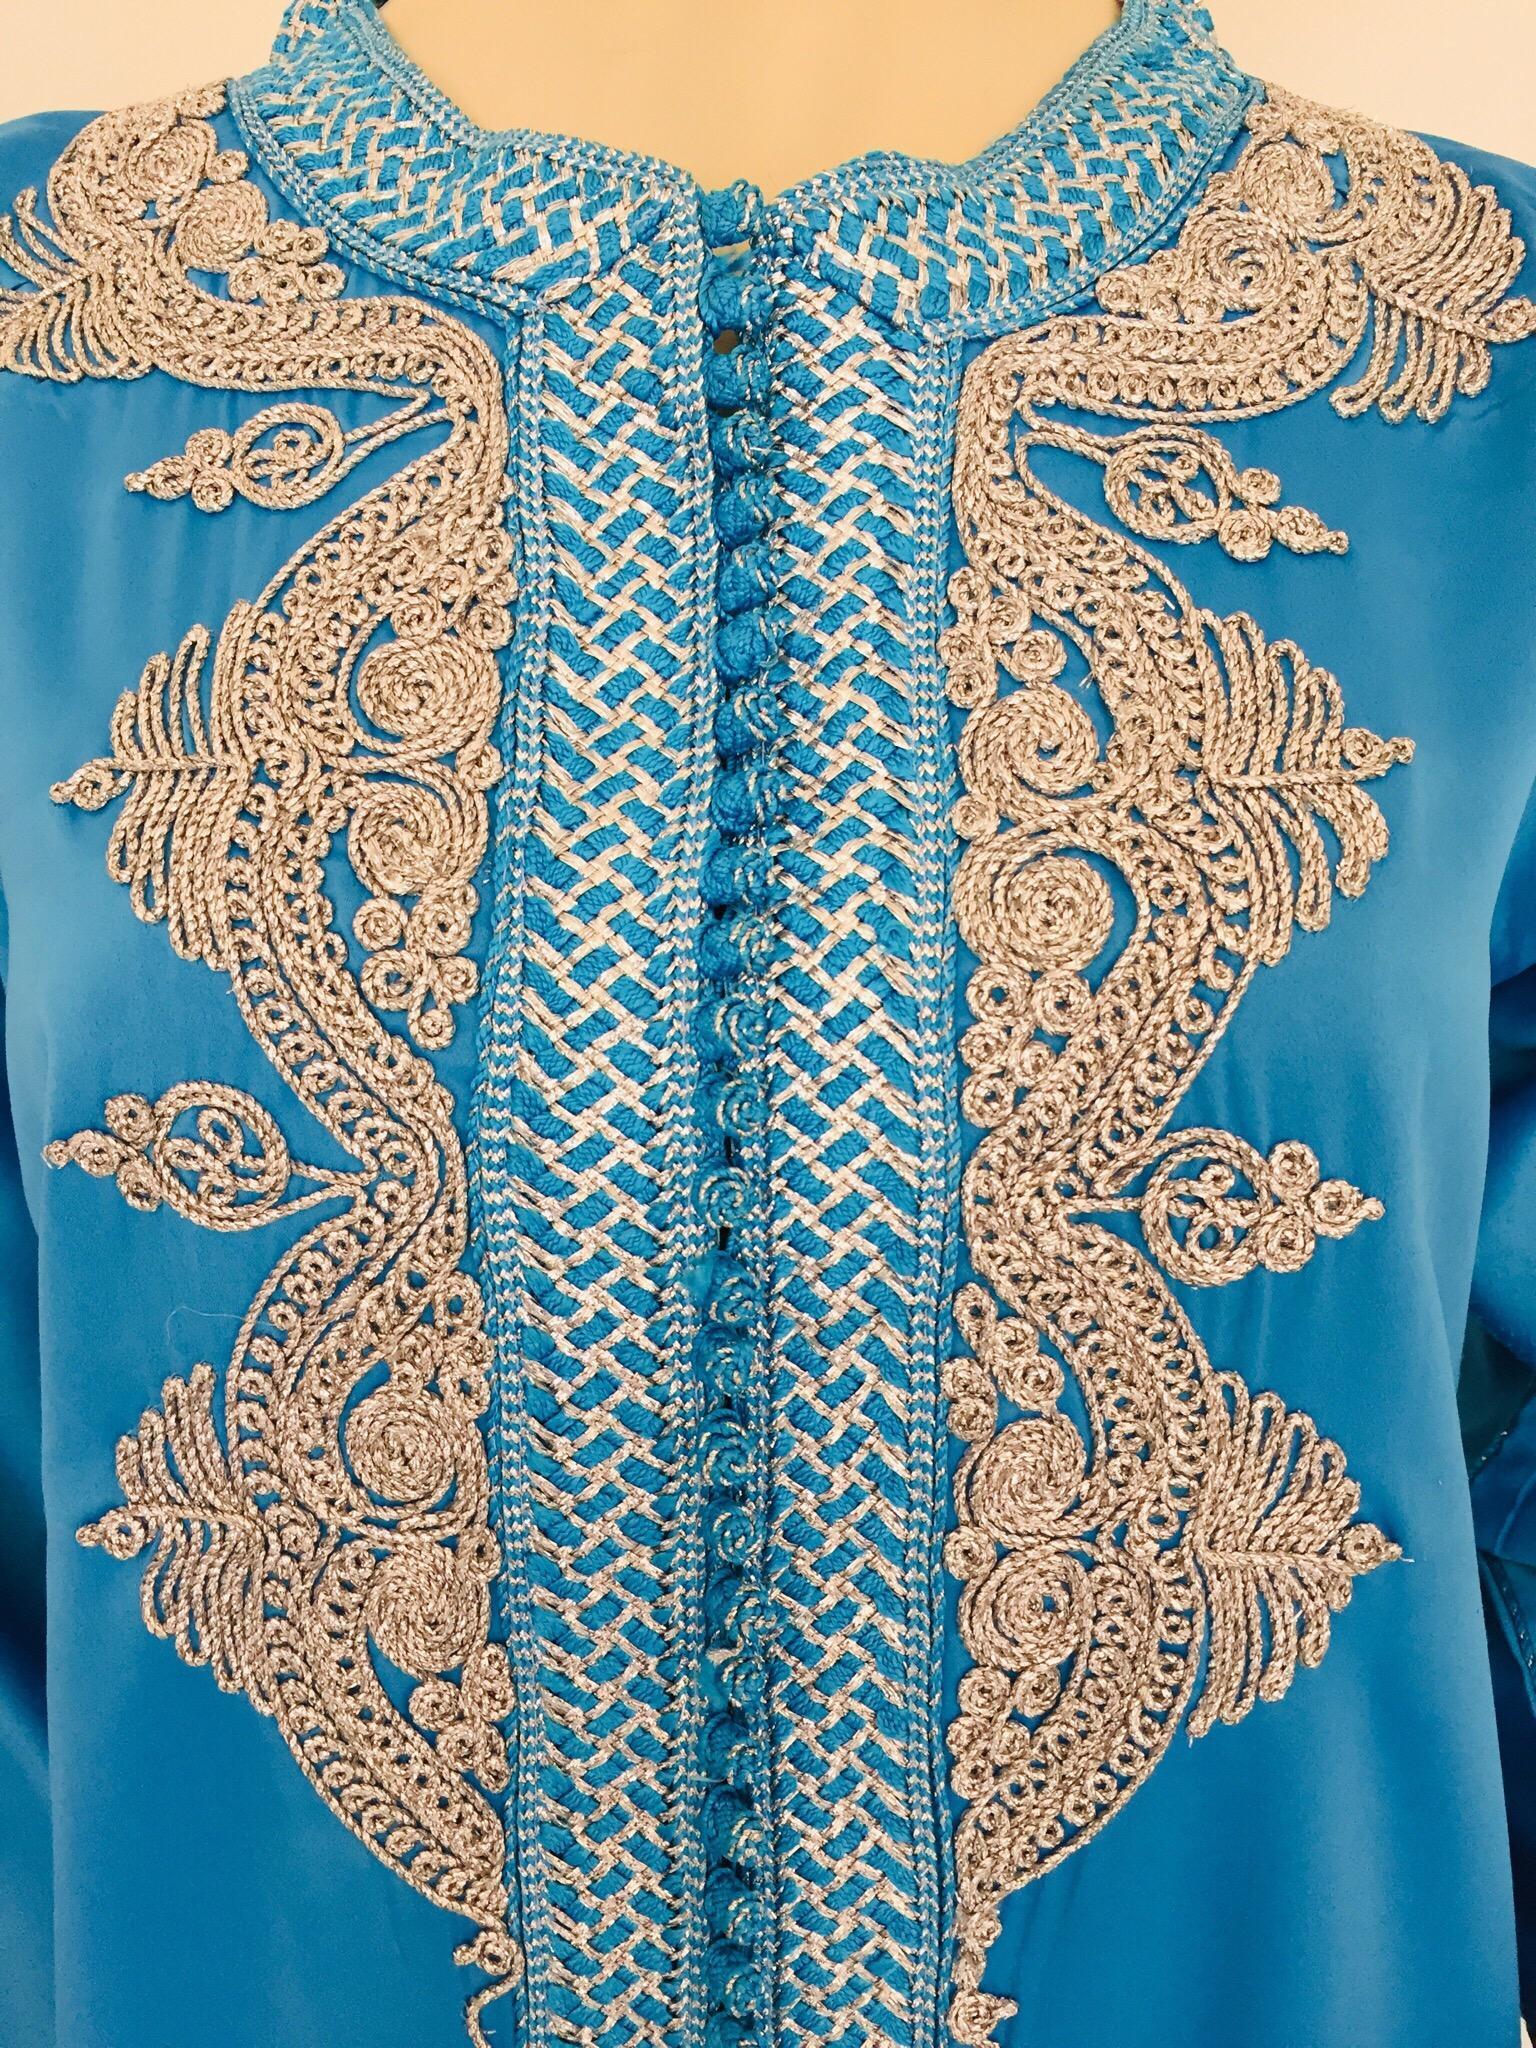 Moroccan Kaftan in Turquoise Blue and Silver For Sale 2